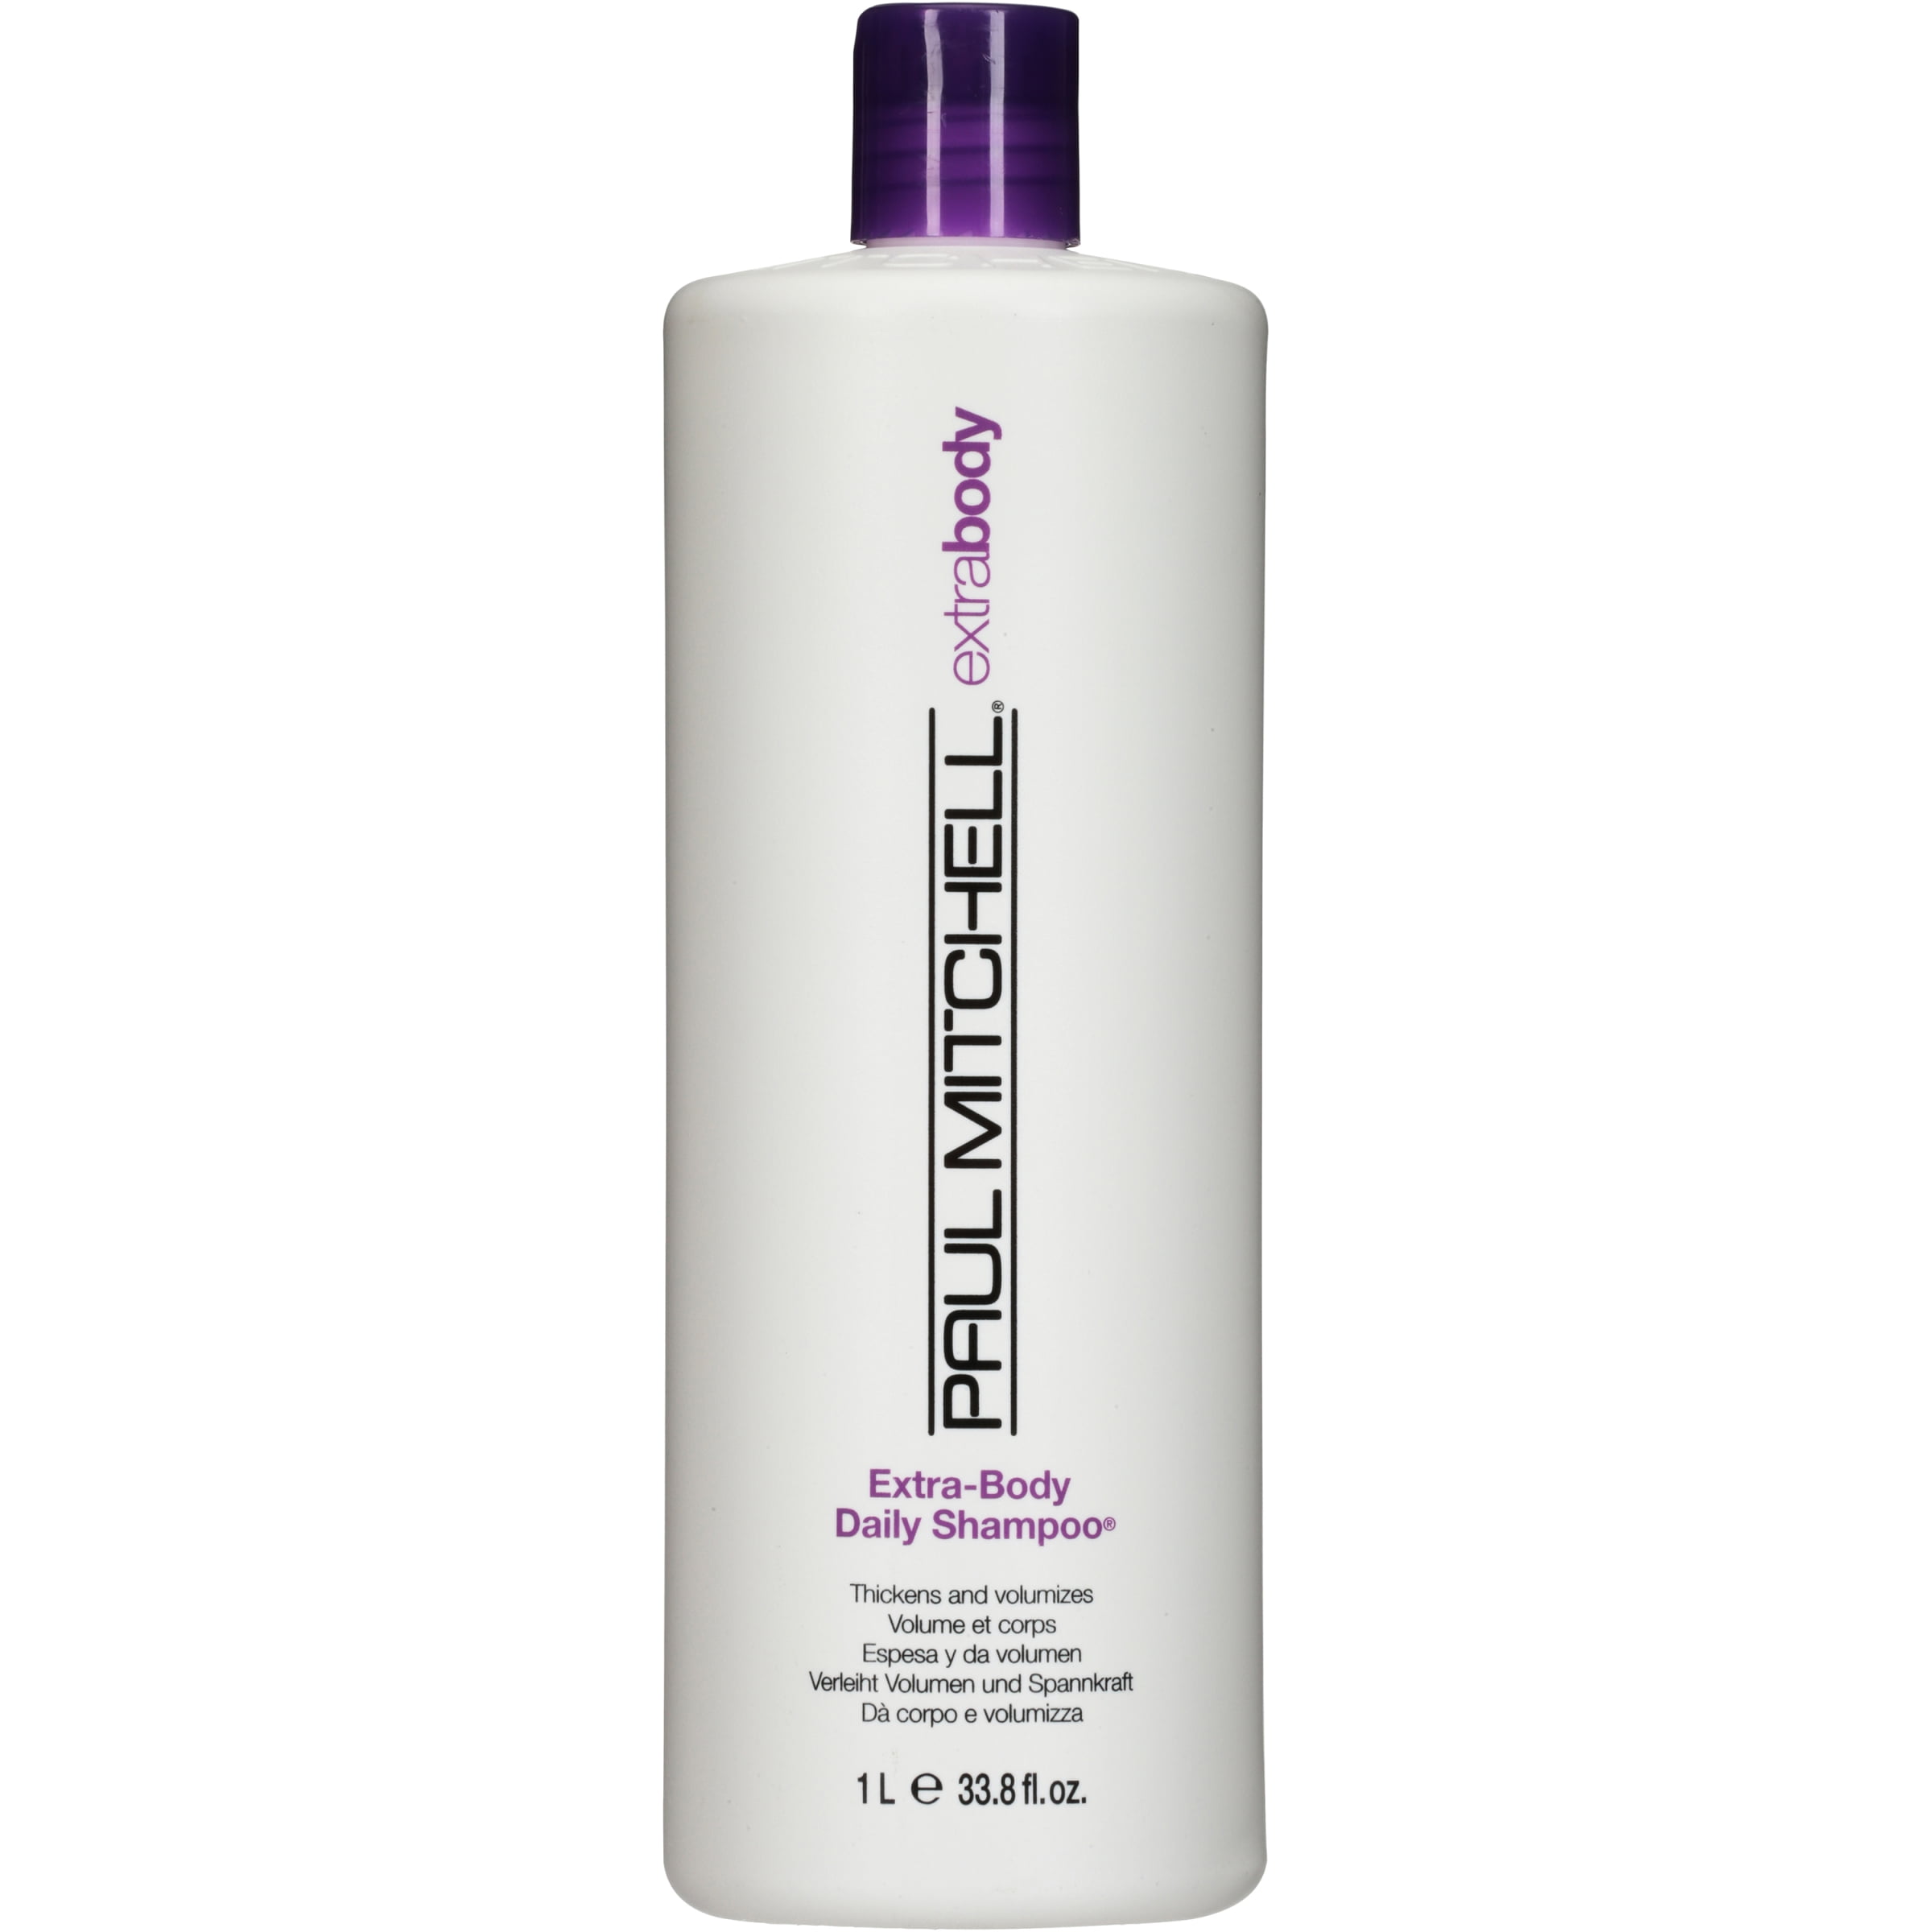 Mathis Chaiselong forfængelighed PAUL MITCHELL EXTRA-BODY DAILY SHAMPOO 33.8 OZ - Walmart.com